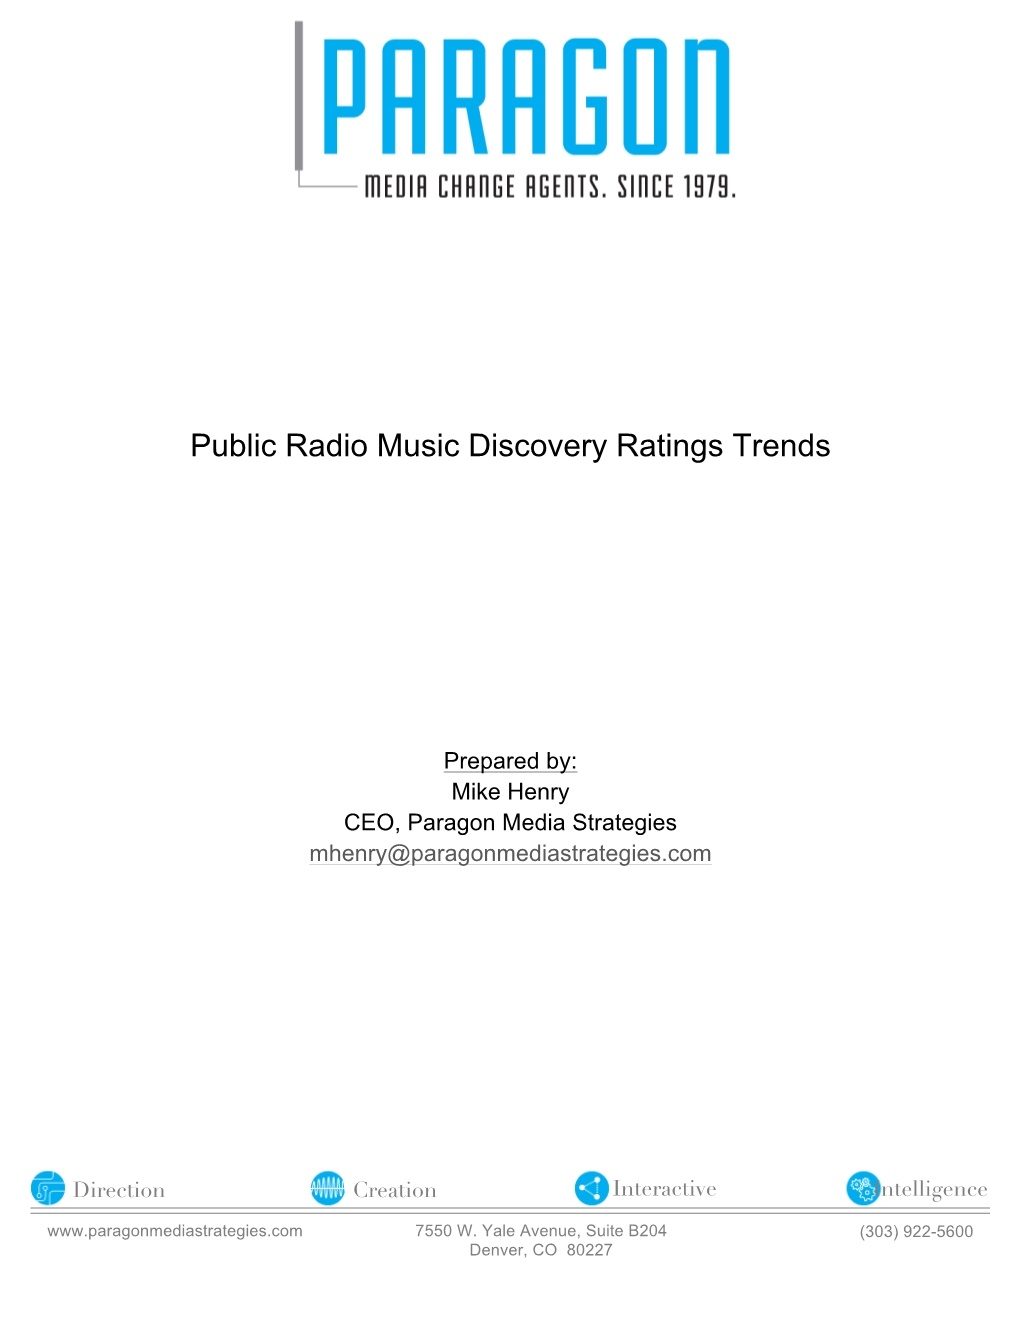 Public Radio Music Discovery Ratings Trends